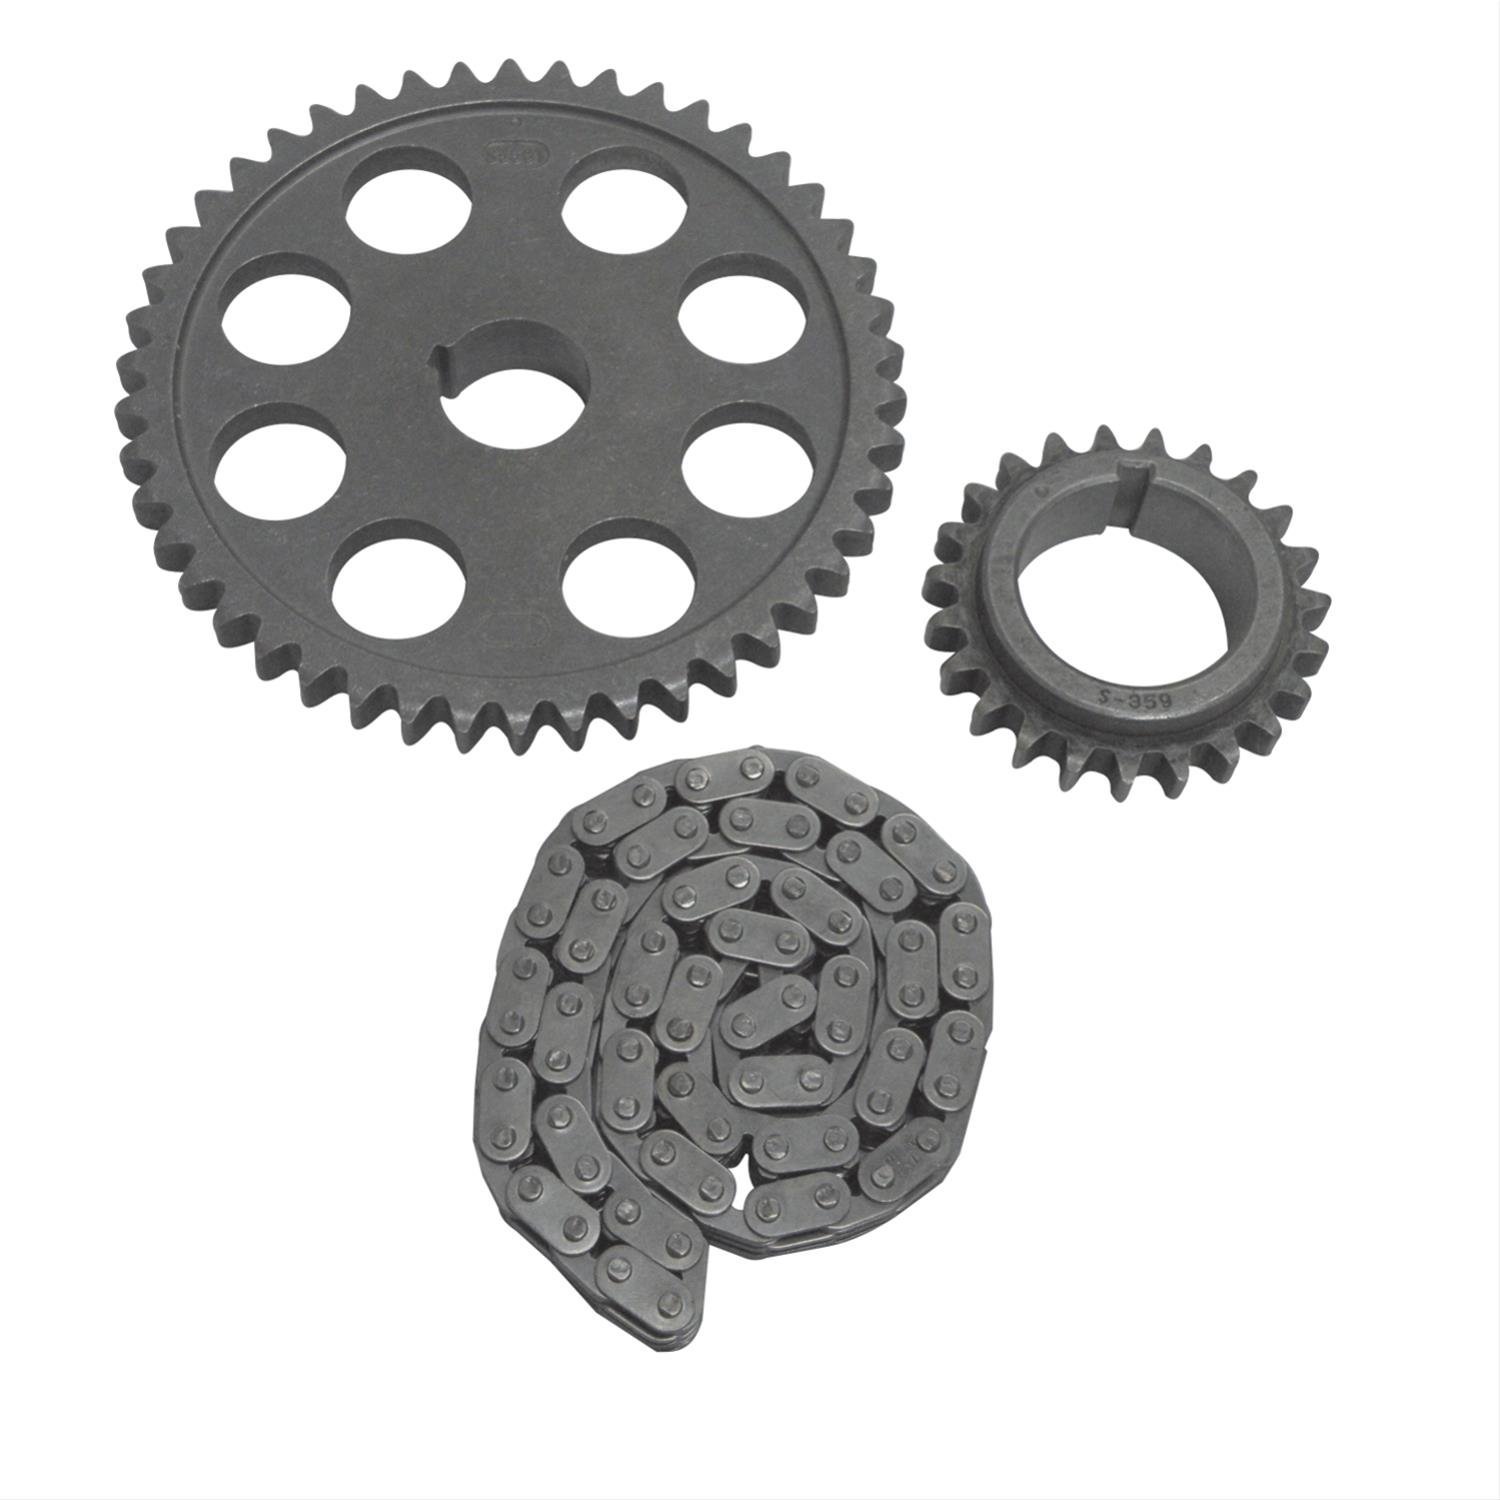 CHAIN-TIMING SET (3)